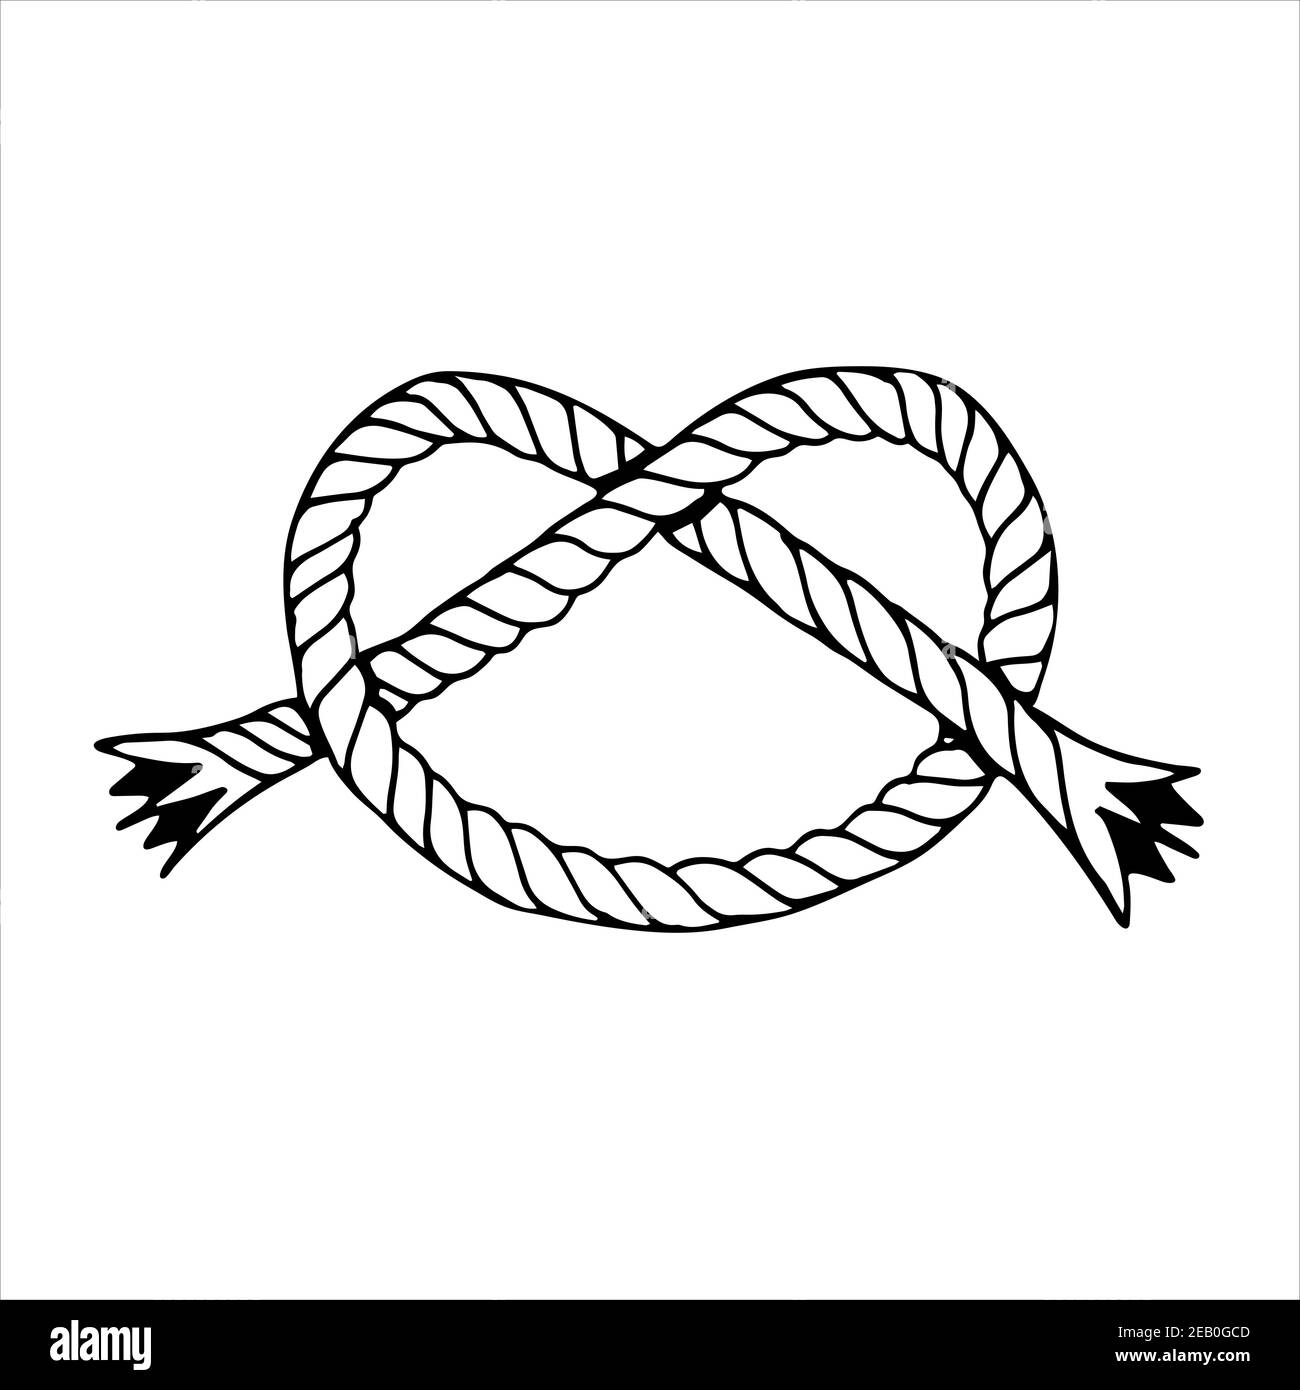 Overhand knot, hand drawn vector illustration Stock Vector